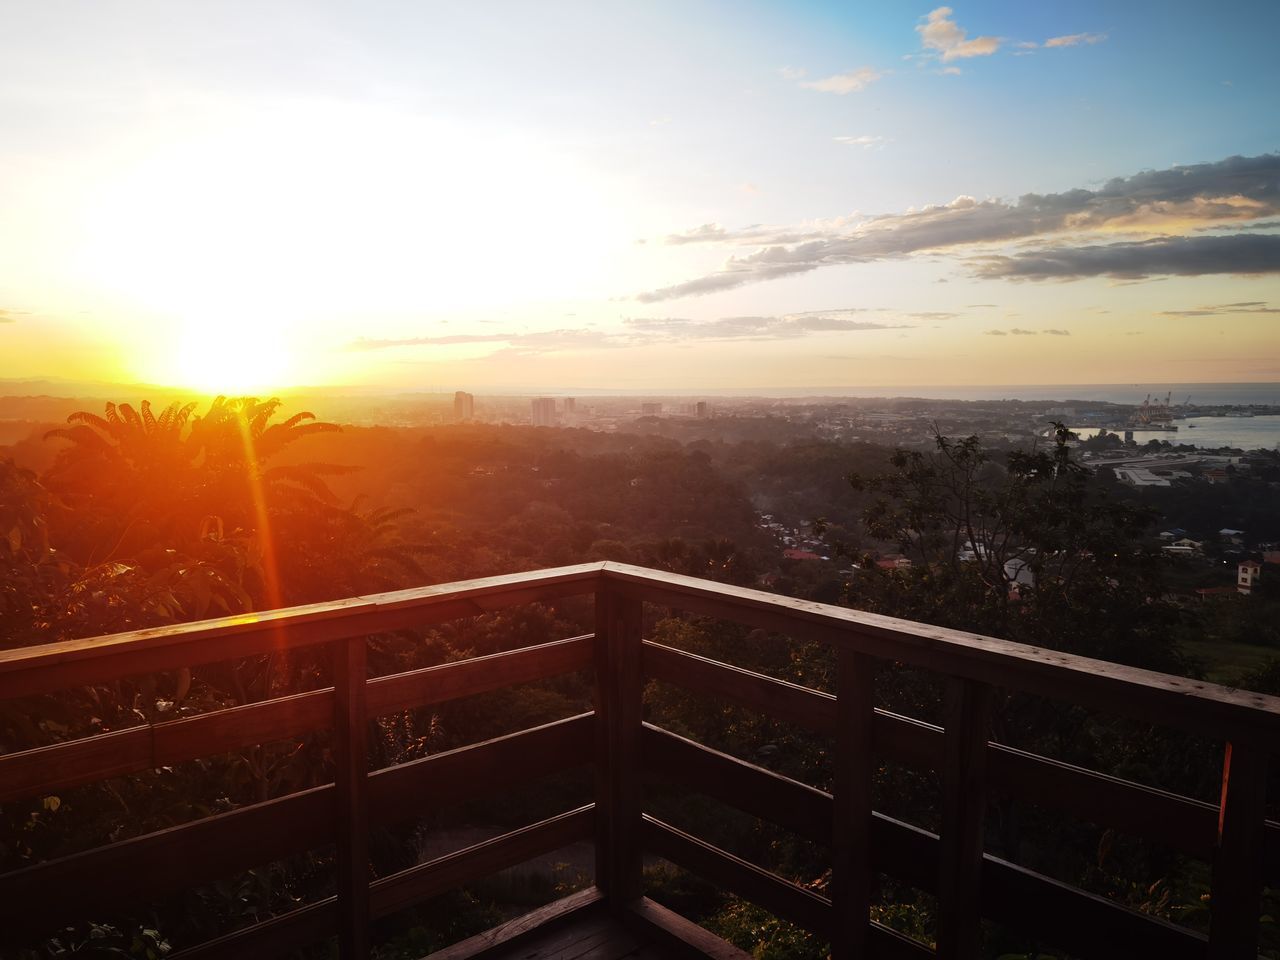 sky, sunset, sun, nature, architecture, sunlight, cloud, city, horizon, lens flare, built structure, evening, landscape, dawn, scenics - nature, building exterior, no people, beauty in nature, sunbeam, environment, outdoors, cityscape, building, tranquility, railing, tranquil scene, orange color, high angle view, travel destinations, residential district, urban skyline, dramatic sky, idyllic, aerial view